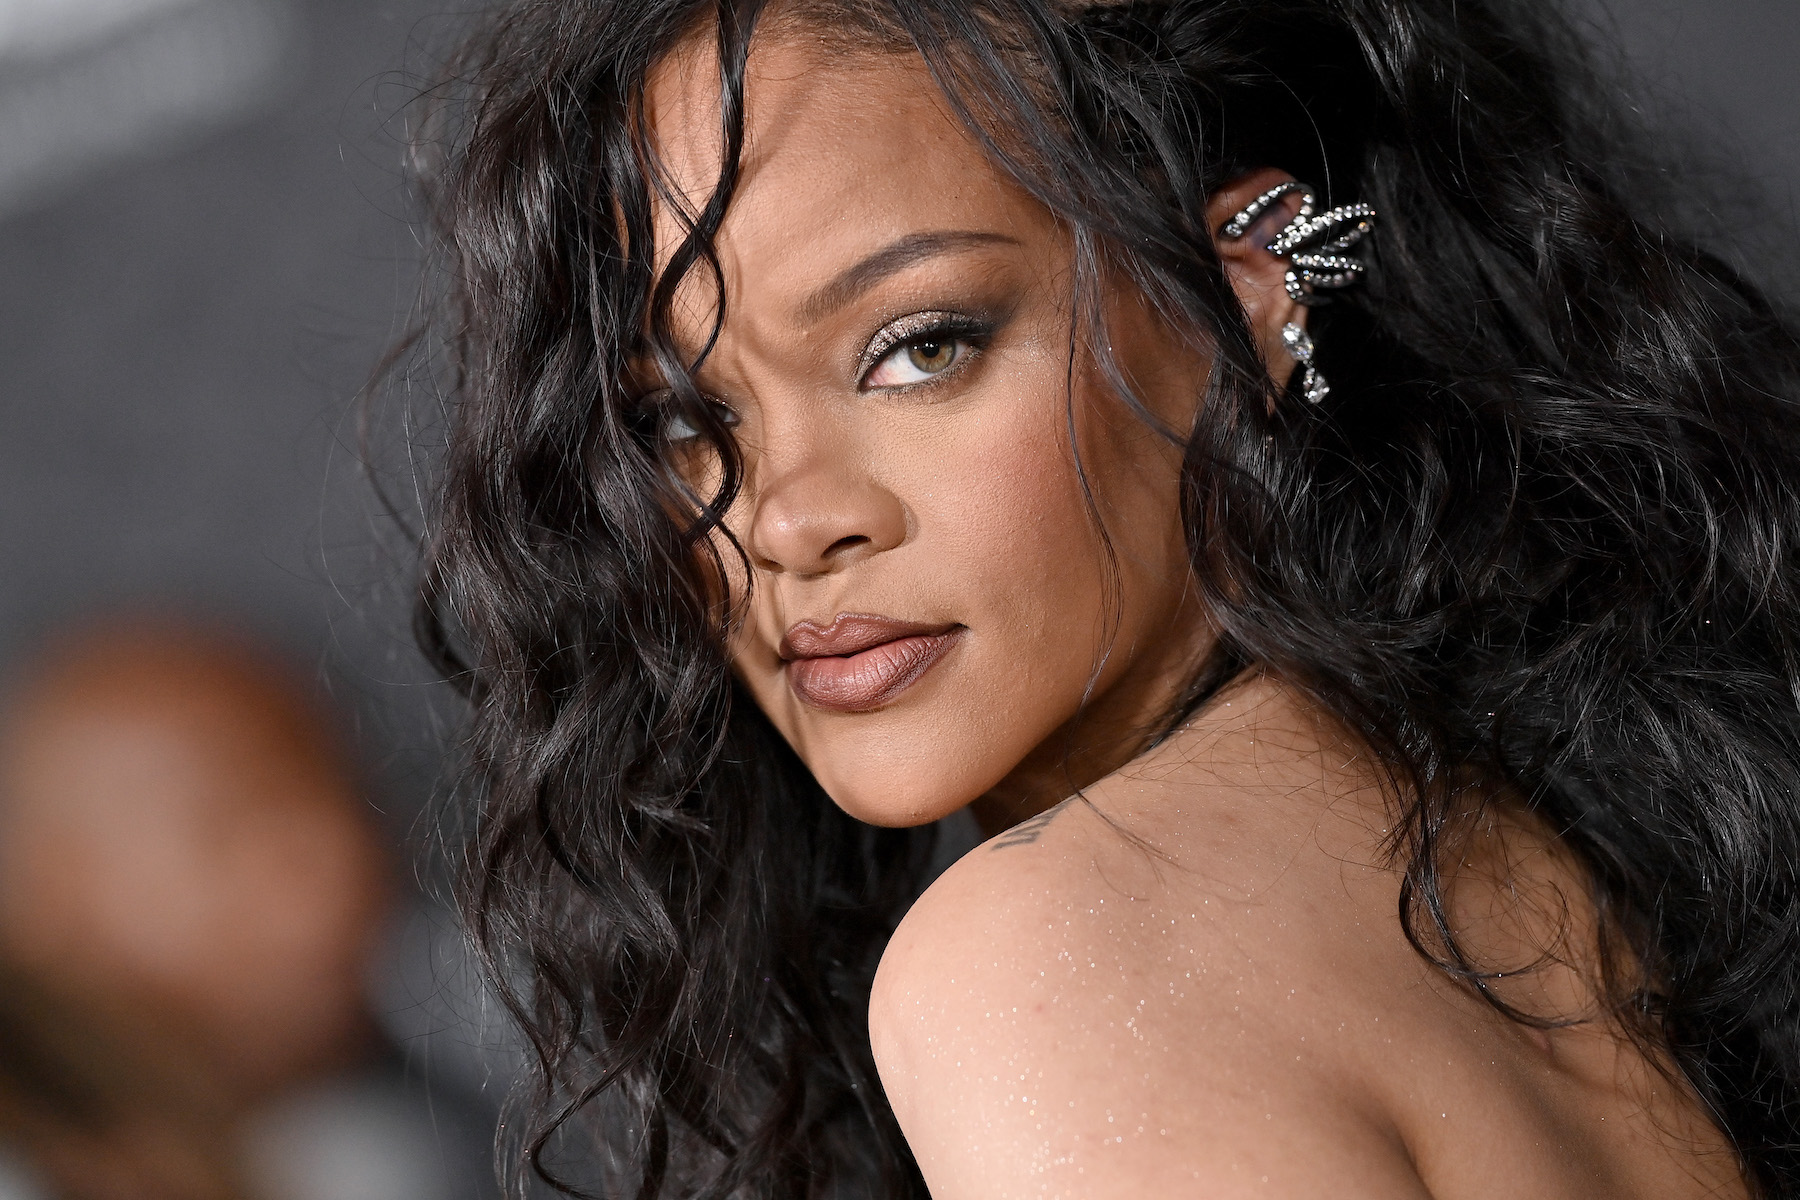 Super Bowl halftime performer Rihanna, who's rumored to have an album in the works